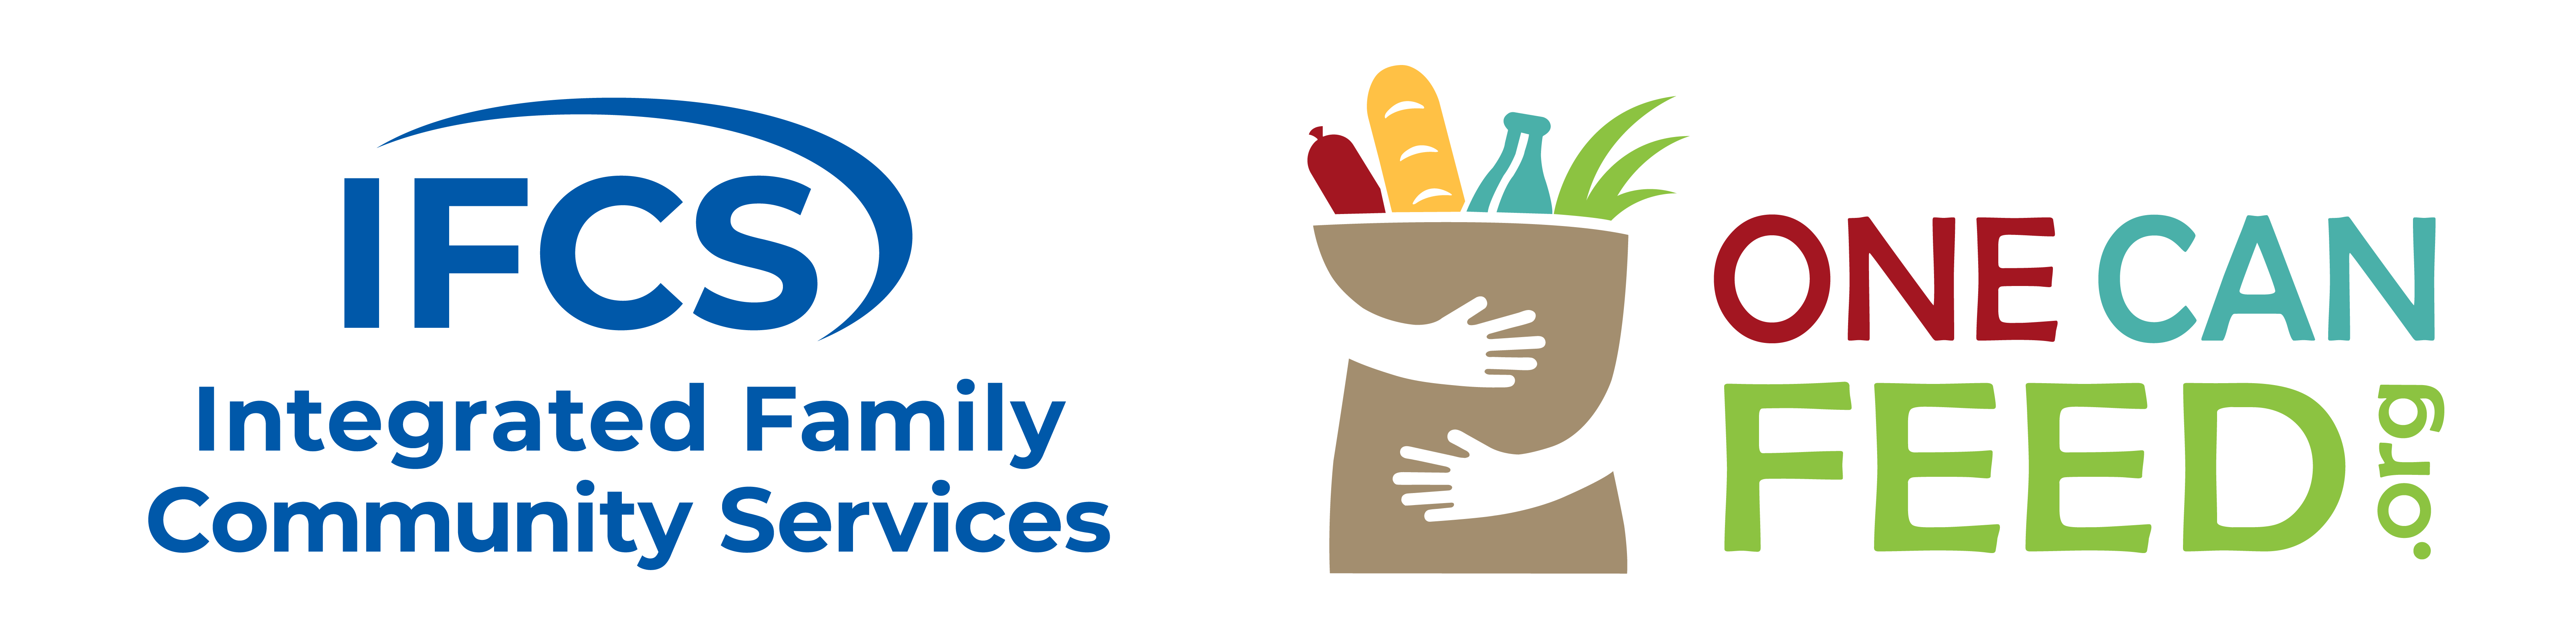 Integrated Family Community Services logo